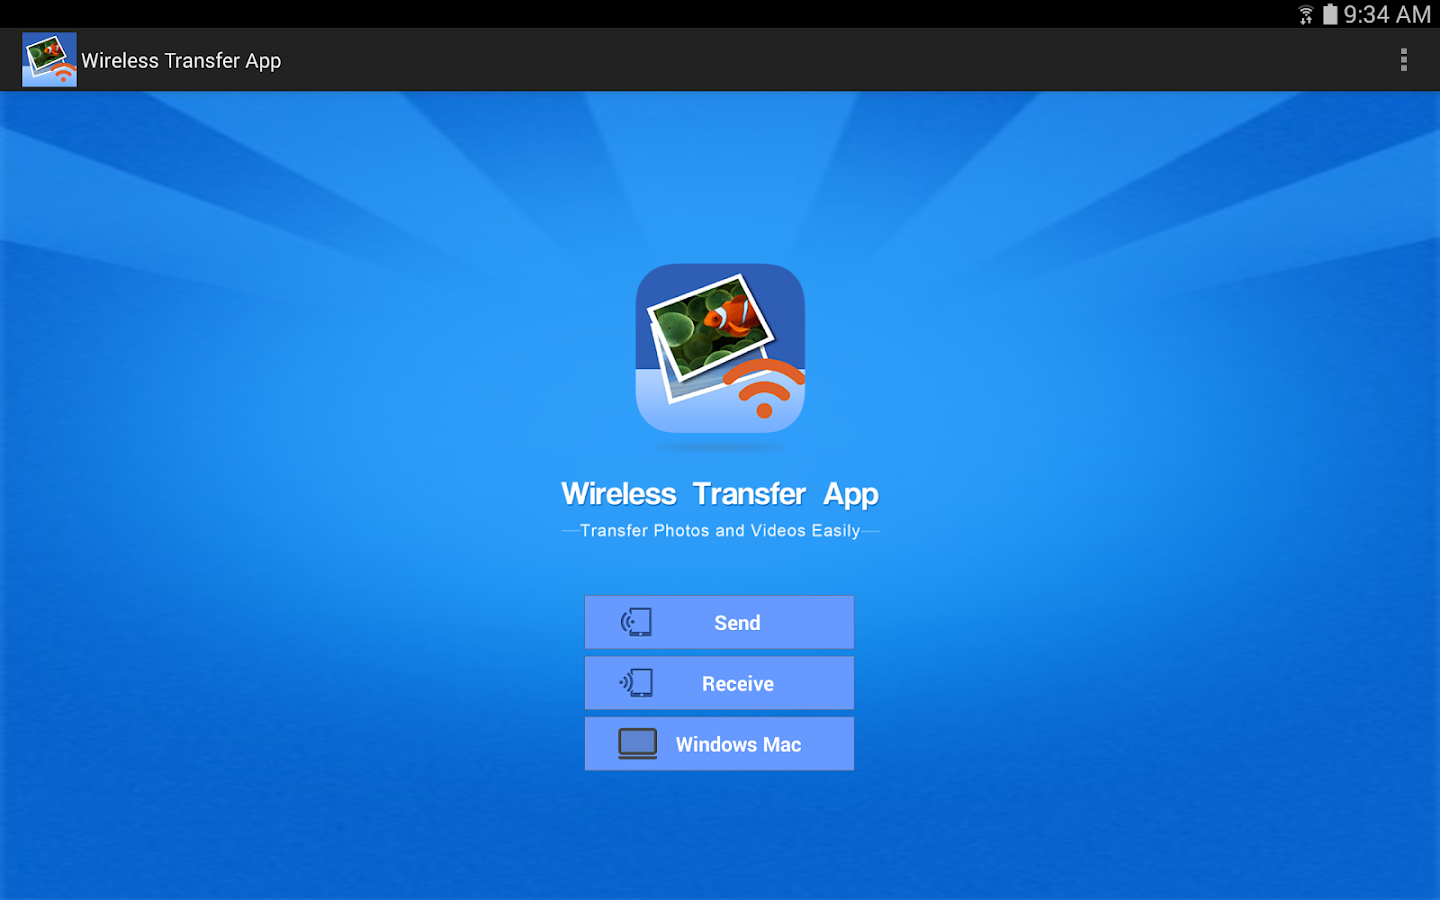 Wireless Transfer App - Free - Android Apps on Google Play